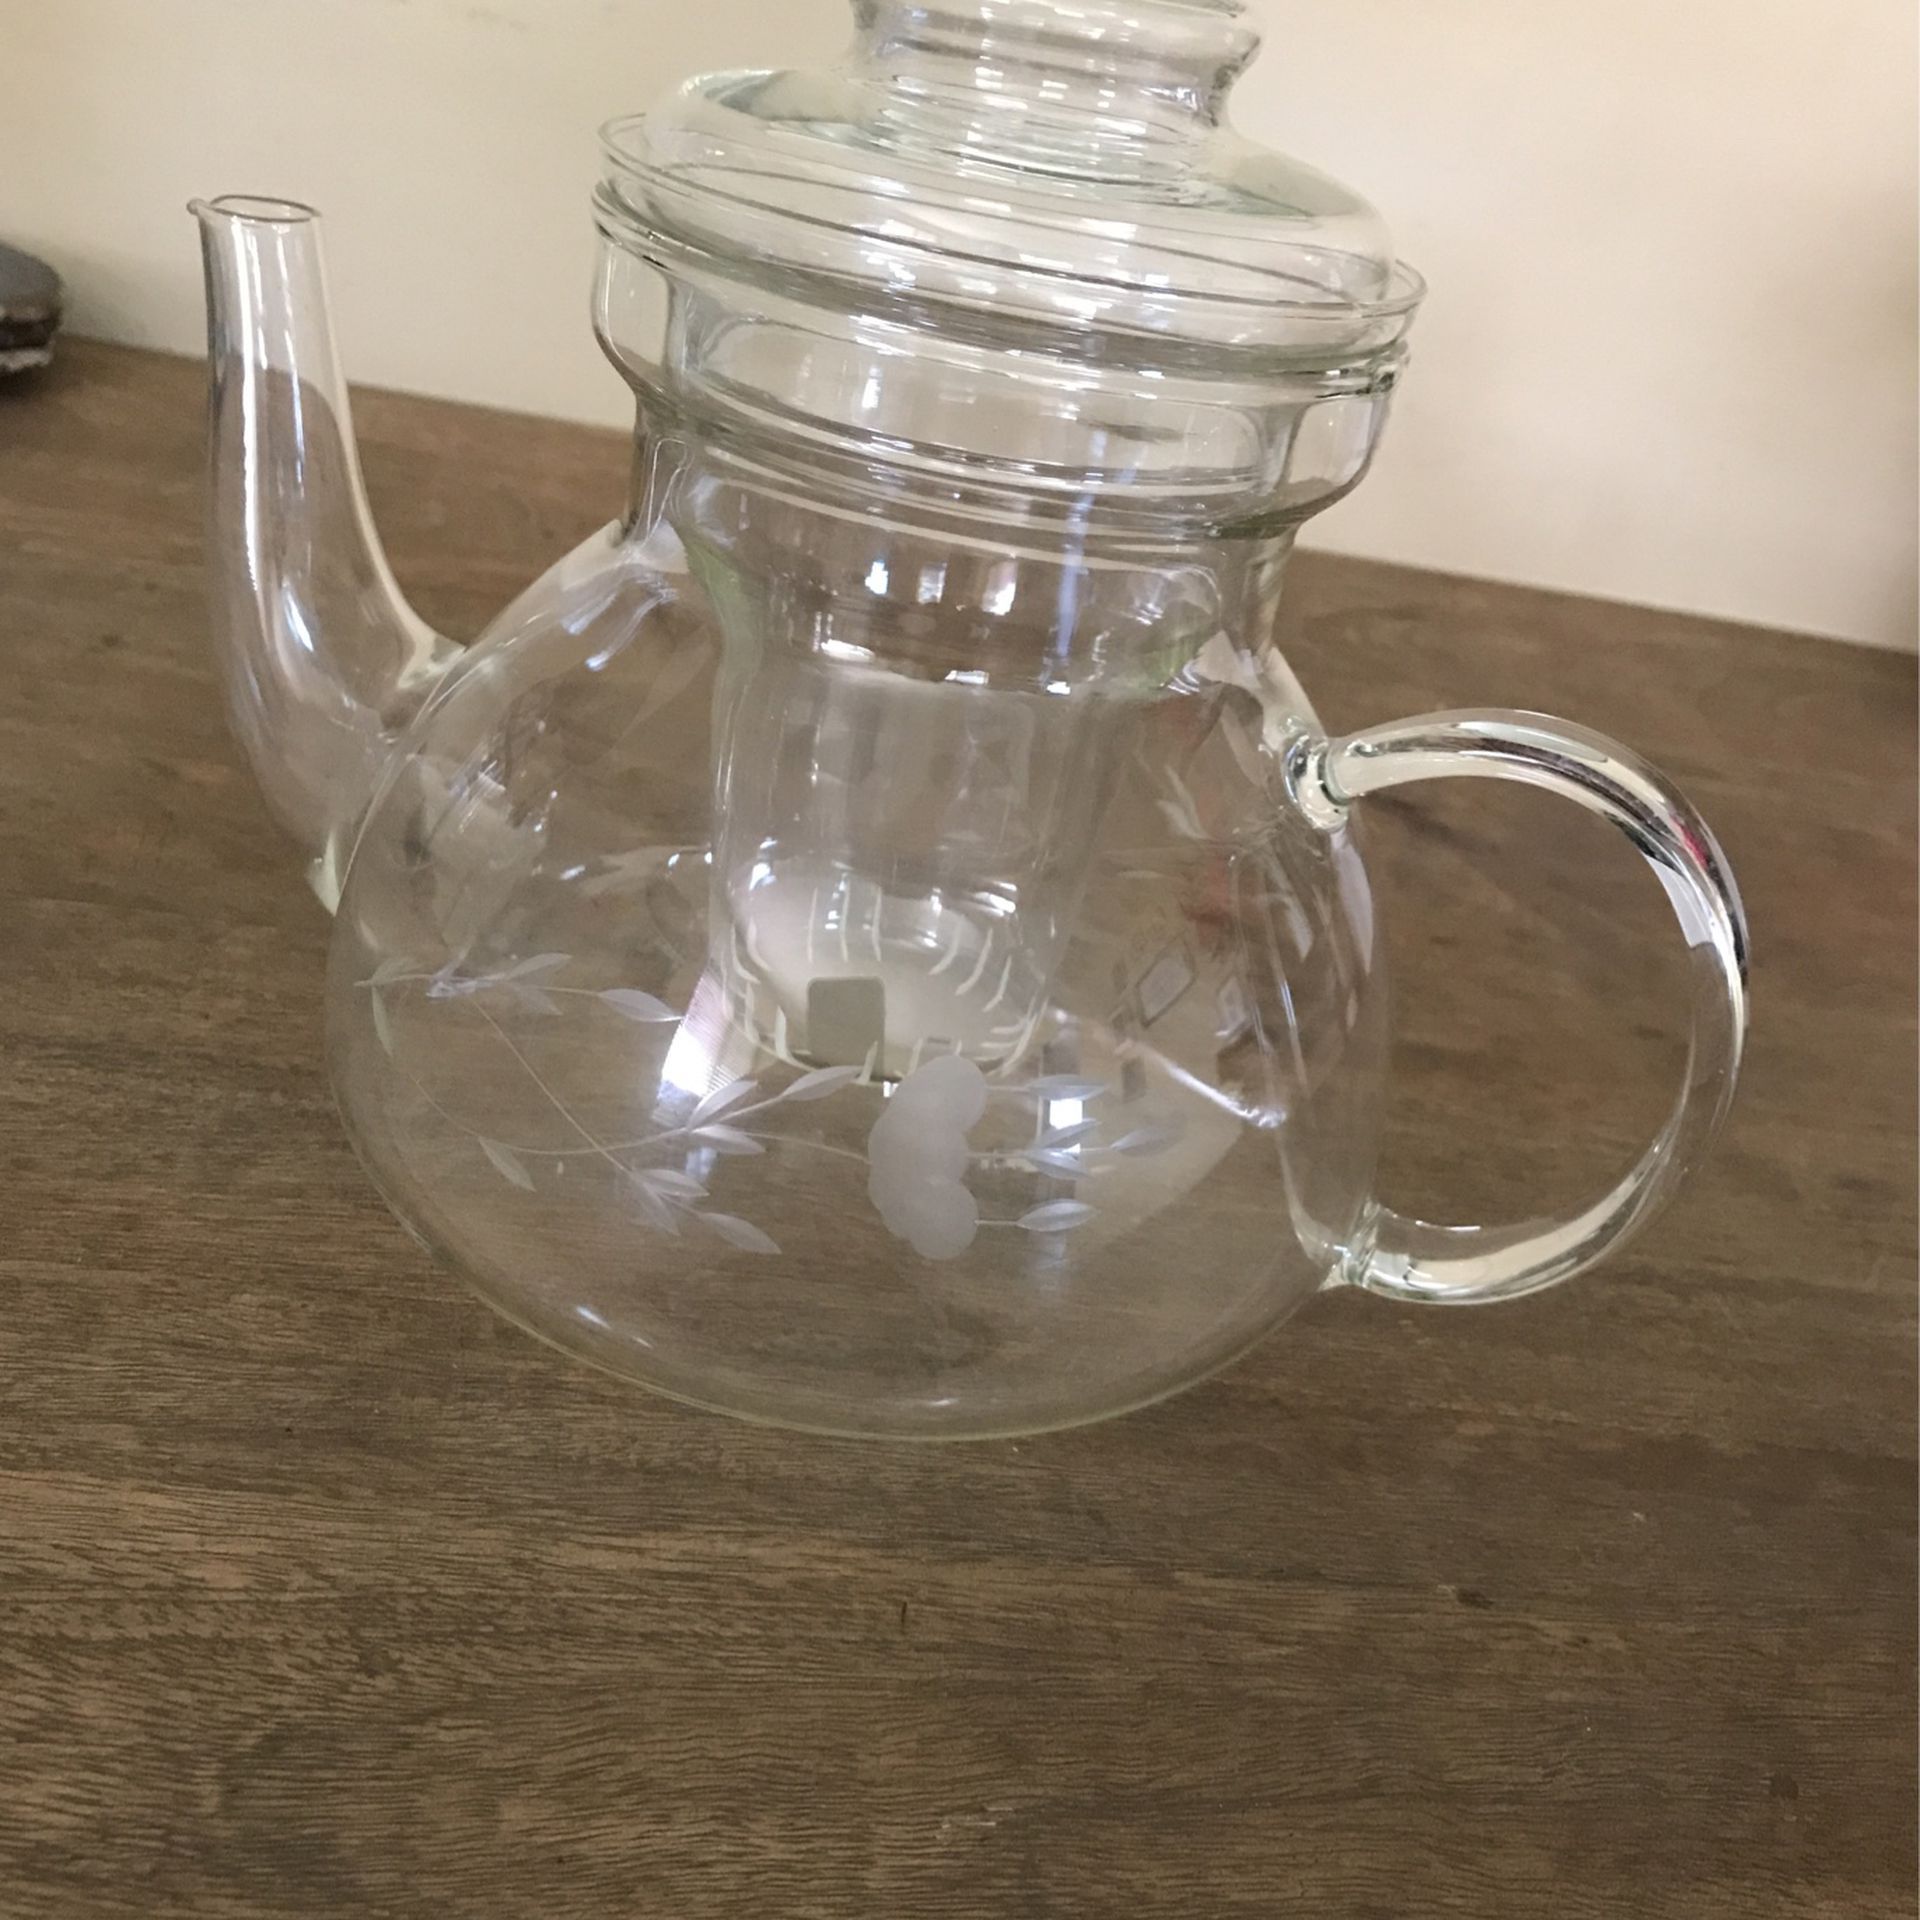 Aroma Housewares 4-cup Electric Kettle for Sale in Jersey City, NJ - OfferUp